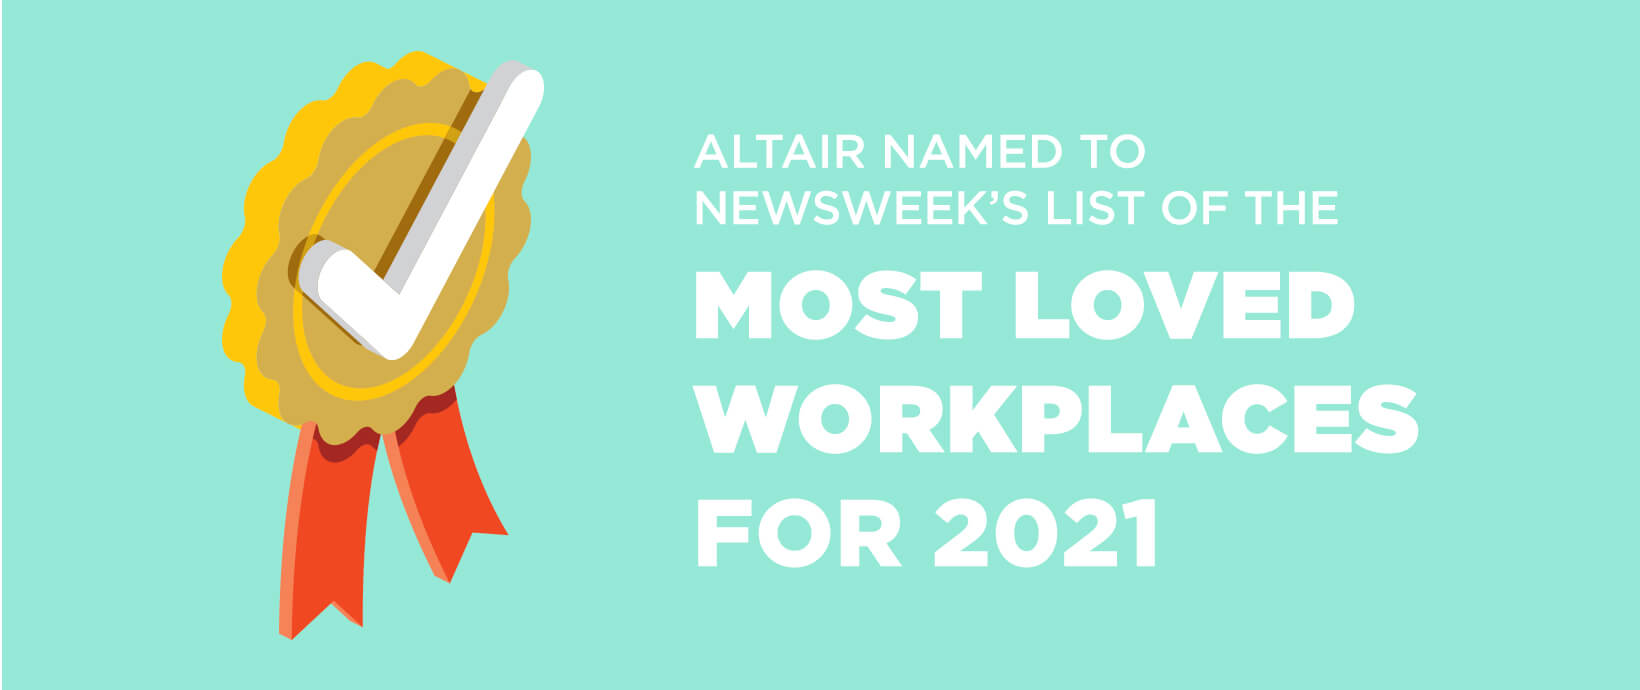 Altair Named to Newsweek’s List of the Most Loved Workplaces for 2021